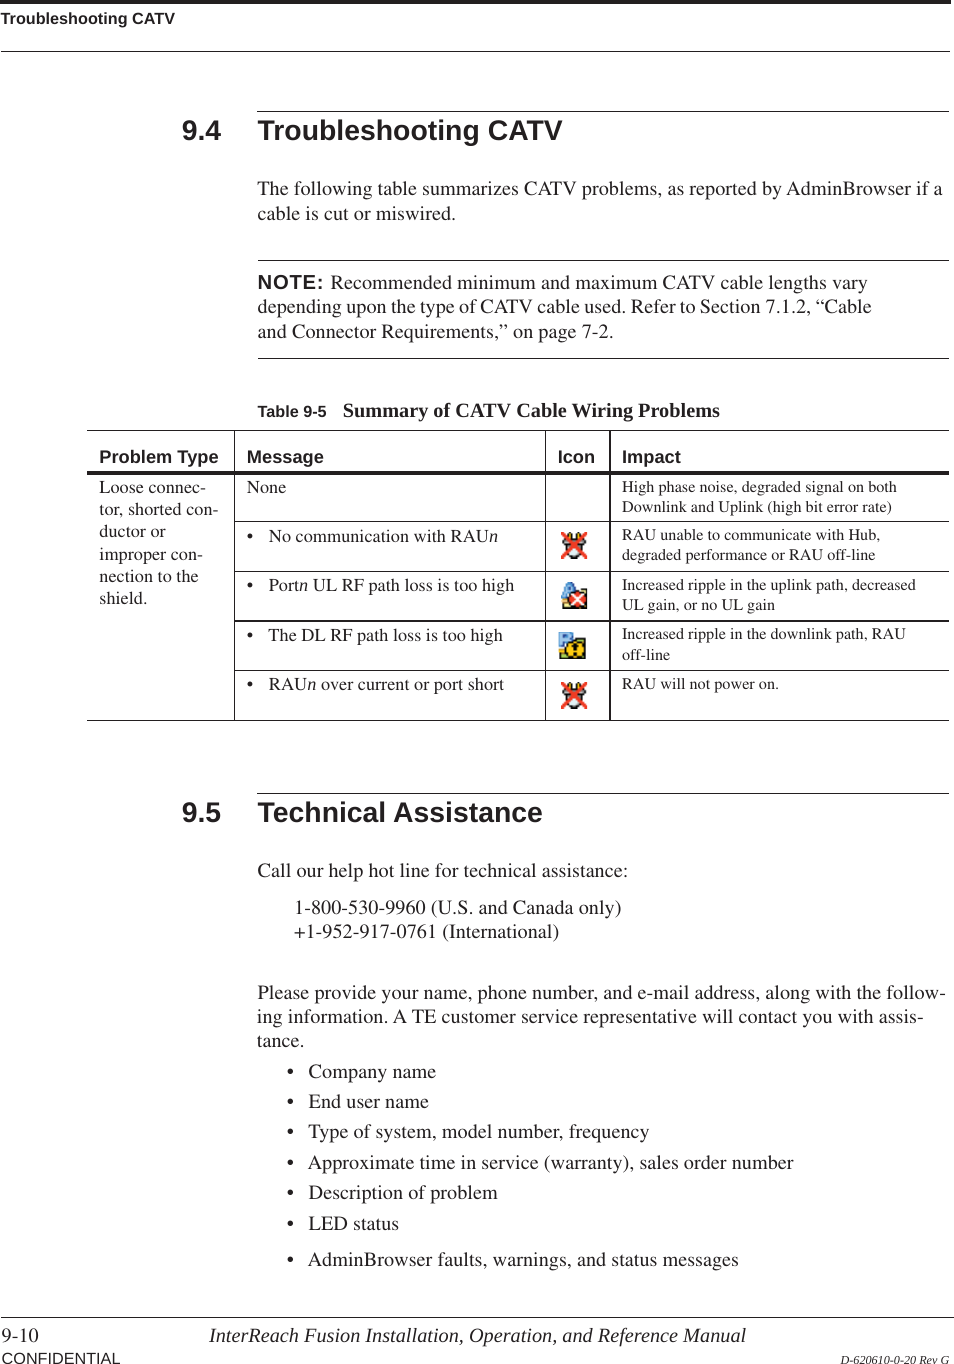 Troubleshooting CATV9-10 InterReach Fusion Installation, Operation, and Reference Manual  CONFIDENTIAL D-620610-0-20 Rev G9.4 Troubleshooting CATVThe following table summarizes CATV problems, as reported by AdminBrowser if a cable is cut or miswired.Table 9-5 Summary of CATV Cable Wiring ProblemsProblem Type Message Icon ImpactLoose connec-tor, shorted con-ductor or improper con-nection to the shield.None High phase noise, degraded signal on both Downlink and Uplink (high bit error rate)• No communication with RAUn  RAU unable to communicate with Hub, degraded performance or RAU off-line• Portn UL RF path loss is too high Increased ripple in the uplink path, decreased UL gain, or no UL gain• The DL RF path loss is too high Increased ripple in the downlink path, RAU off-line•RAUn over current or port short RAU will not power on.NOTE: Recommended minimum and maximum CATV cable lengths vary depending upon the type of CATV cable used. Refer to Section 7.1.2, “Cable and Connector Requirements,” on page 7-2.9.5 Technical AssistanceCall our help hot line for technical assistance:1-800-530-9960 (U.S. and Canada only) +1-952-917-0761 (International) Please provide your name, phone number, and e-mail address, along with the follow-ing information. A TE customer service representative will contact you with assis-tance.• Company name• End user name• Type of system, model number, frequency• Approximate time in service (warranty), sales order number• Description of problem• LED status• AdminBrowser faults, warnings, and status messages